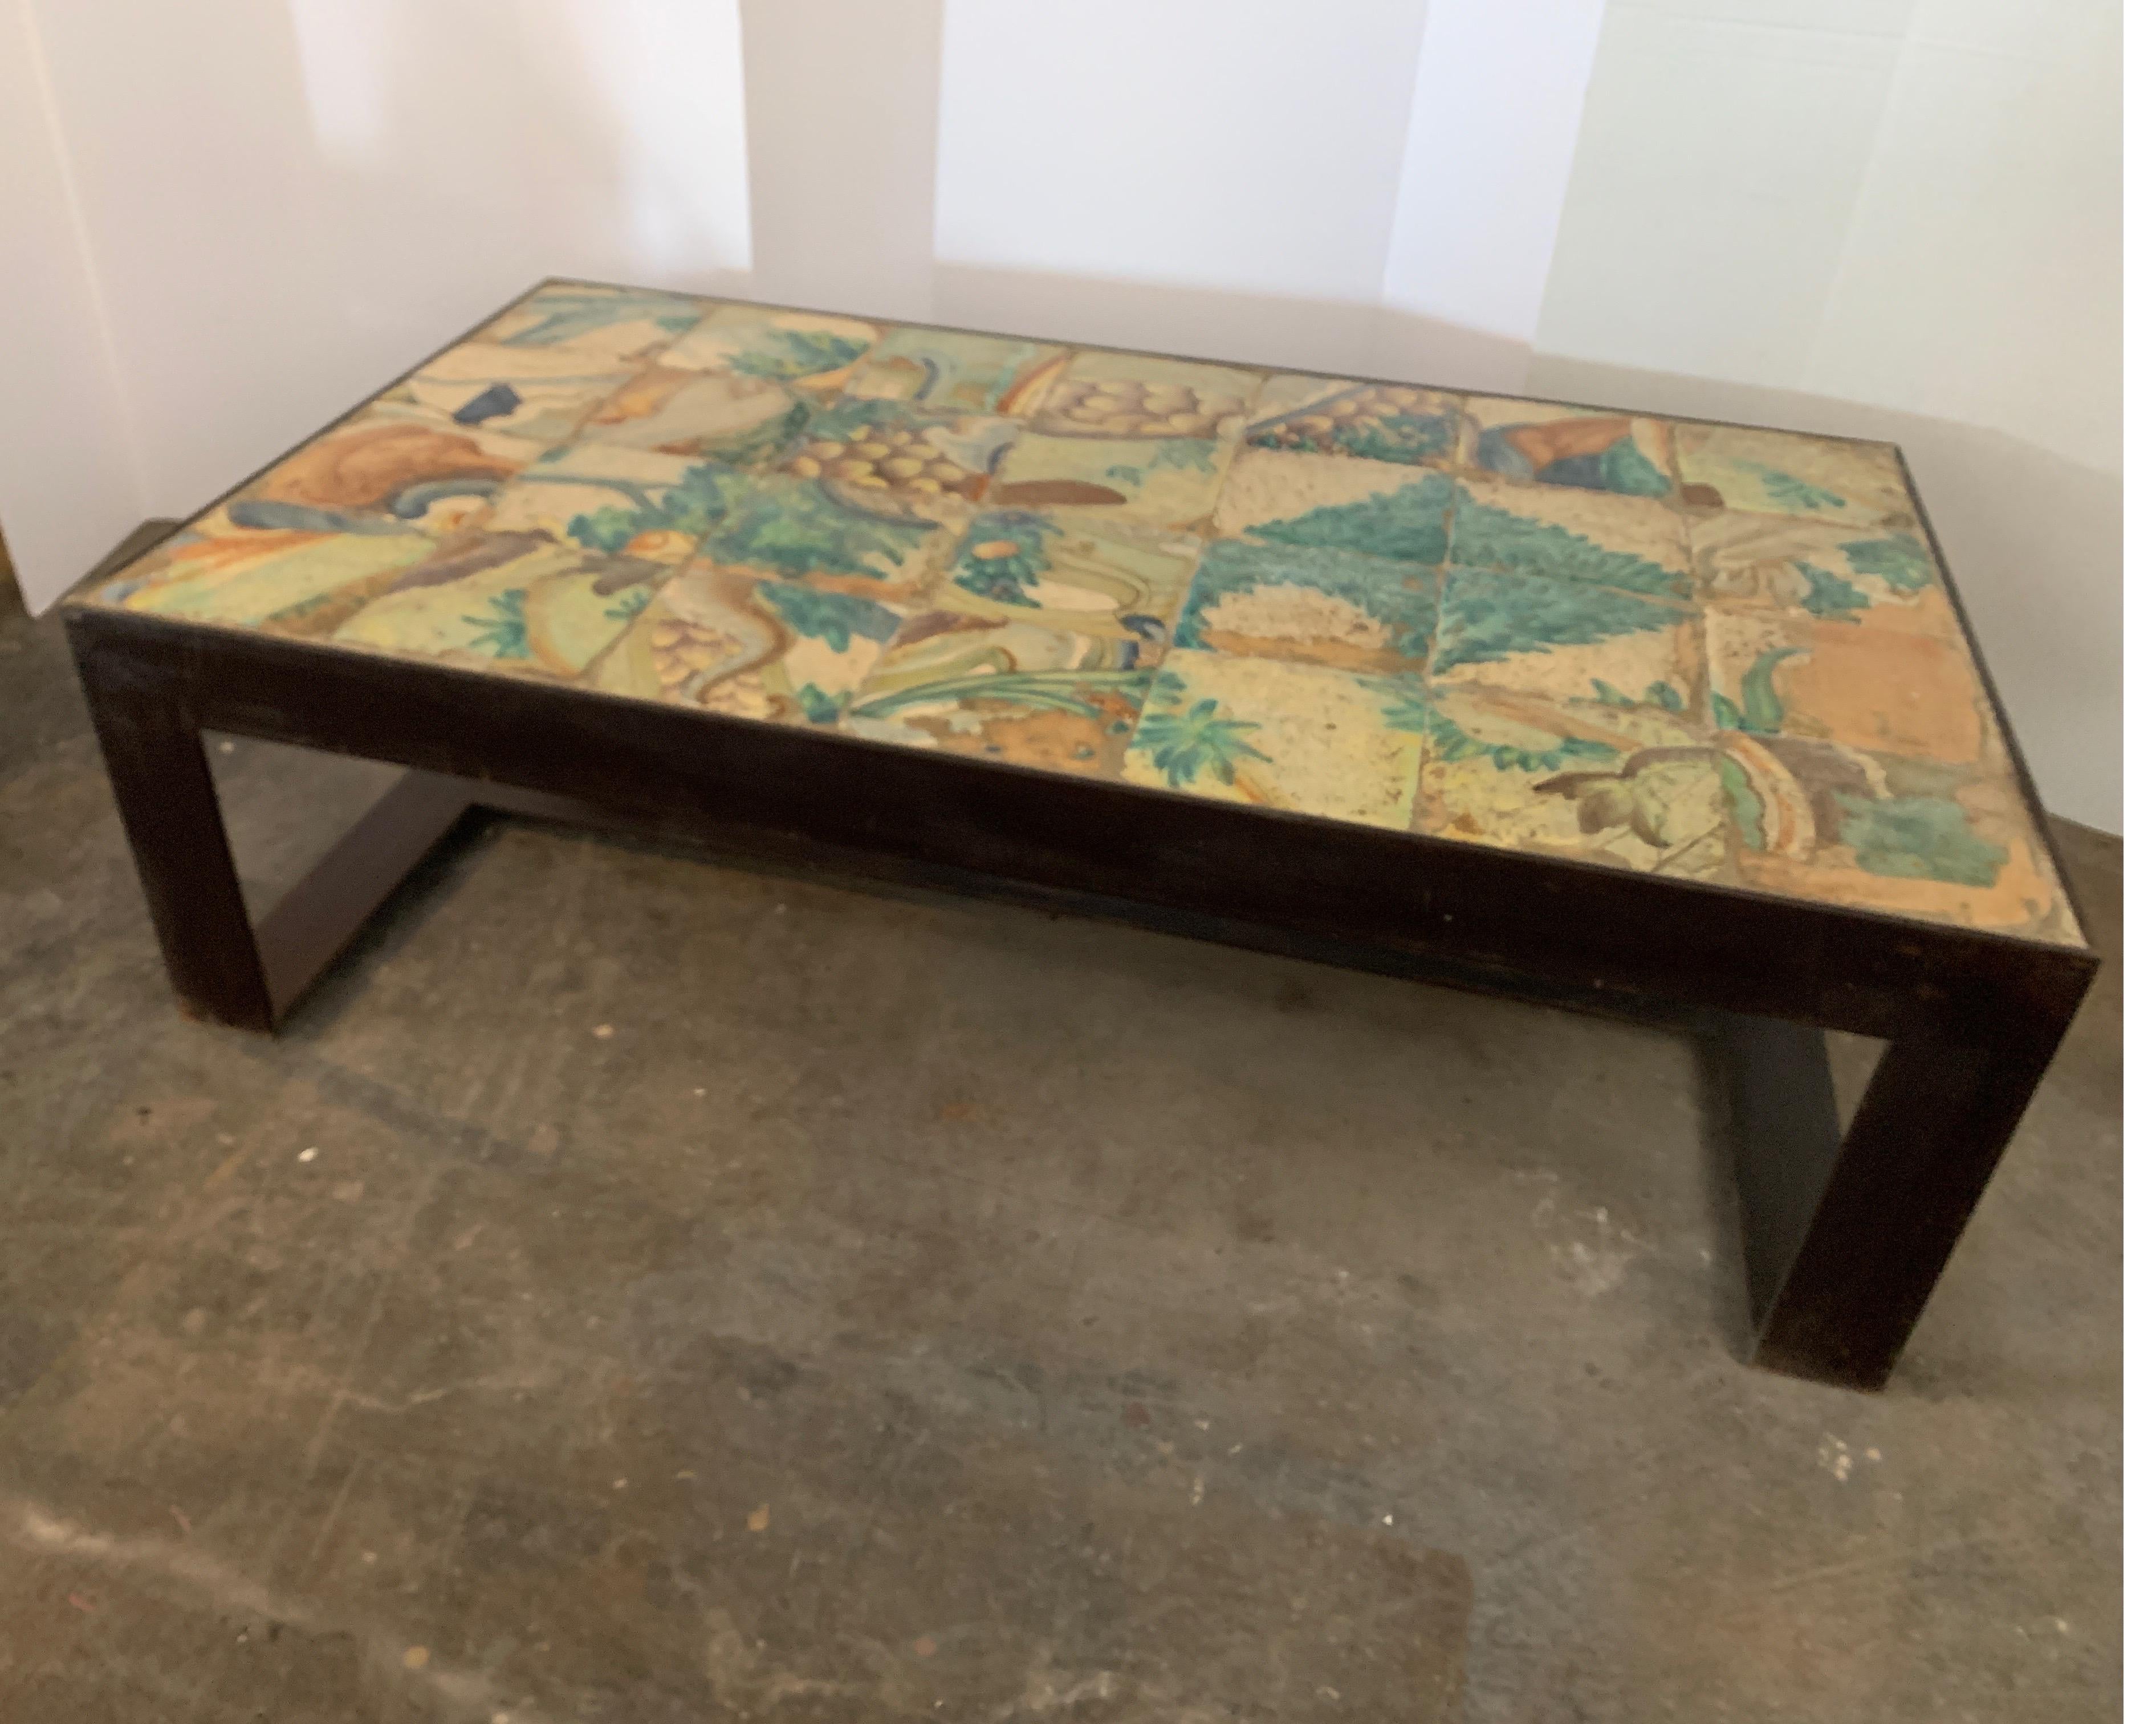 These tiles from Portugal are beautiful colors that we had set into an forged iron coffee table. It's perfect for outdoors or in. It's very heavy so once in place not going anywhere.